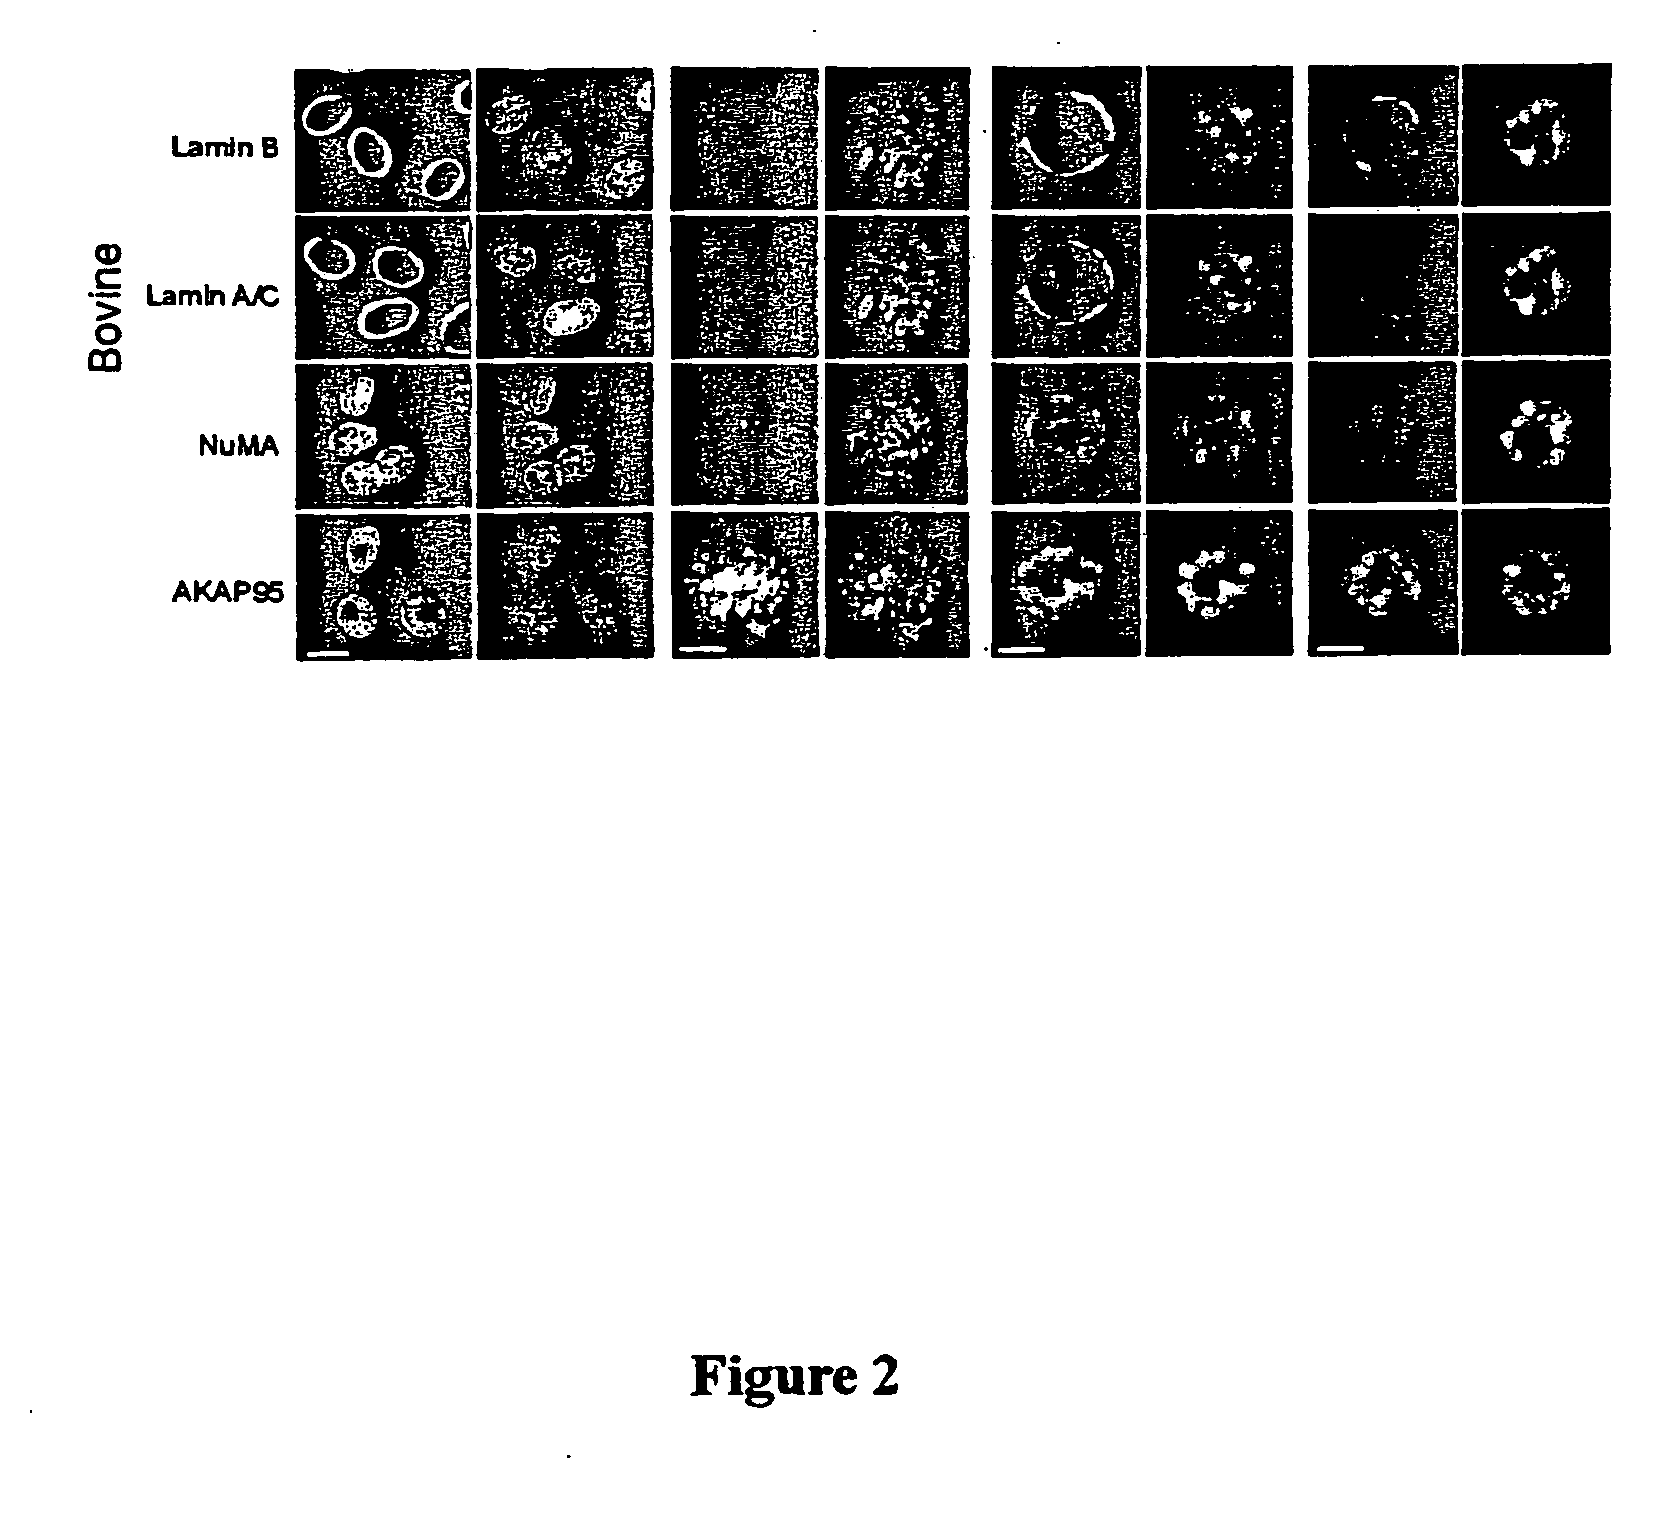 Methods for cloning mammals using reprogrammed donor chromatin or donor cells